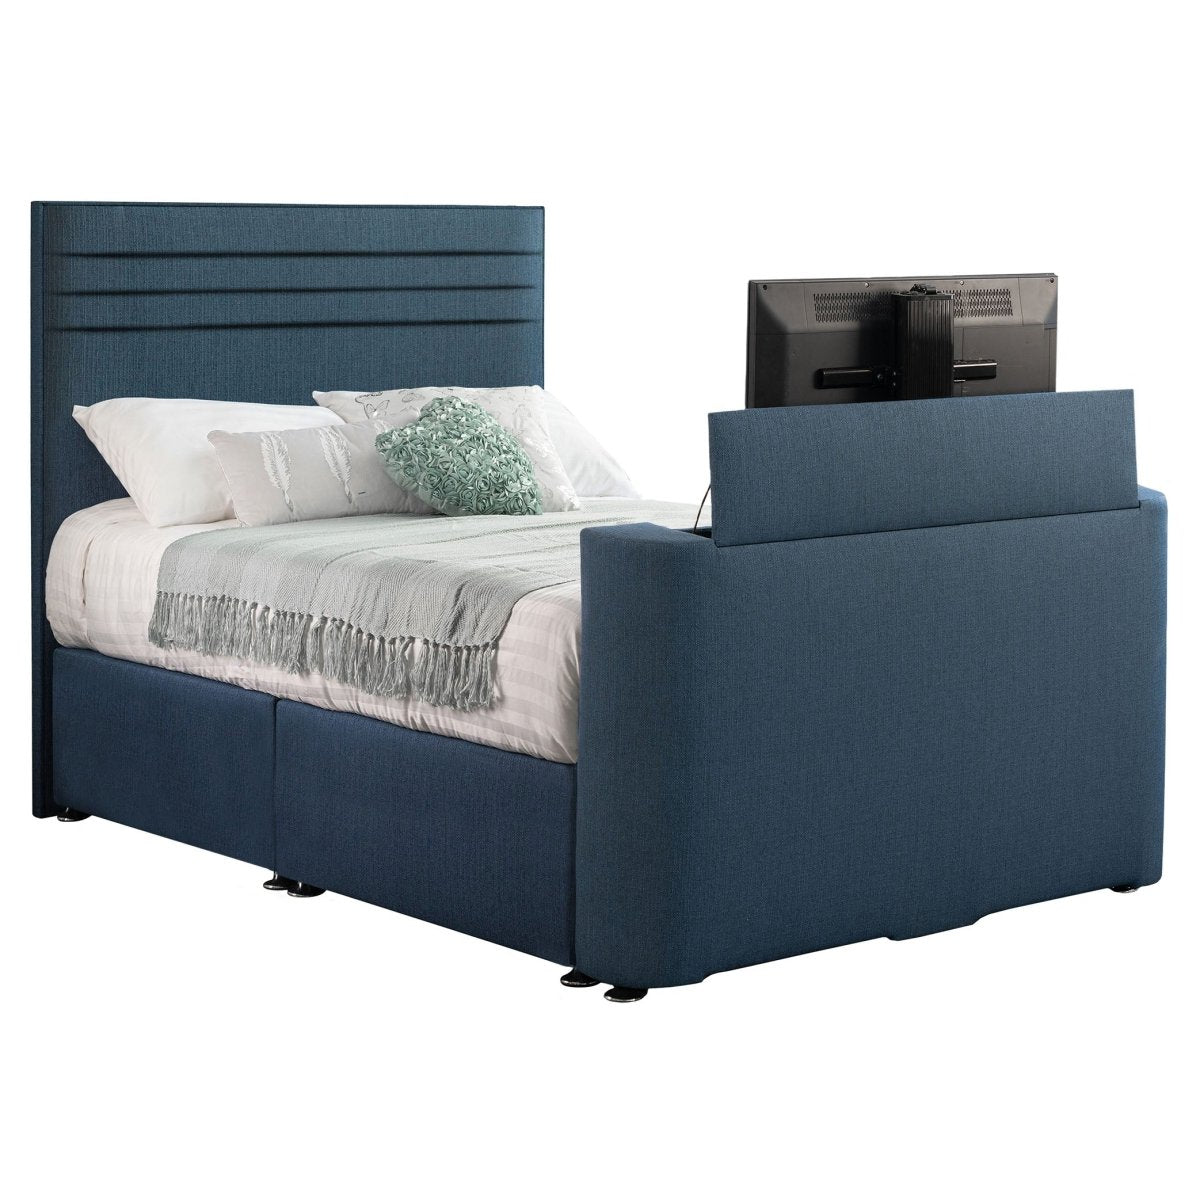 Sweet Dreams Image Chic TV Bed with Storage Options - TV Beds Northwest - INIMA-CHI135PT4DCHATS - choose your colour tvbed - doubletvbed